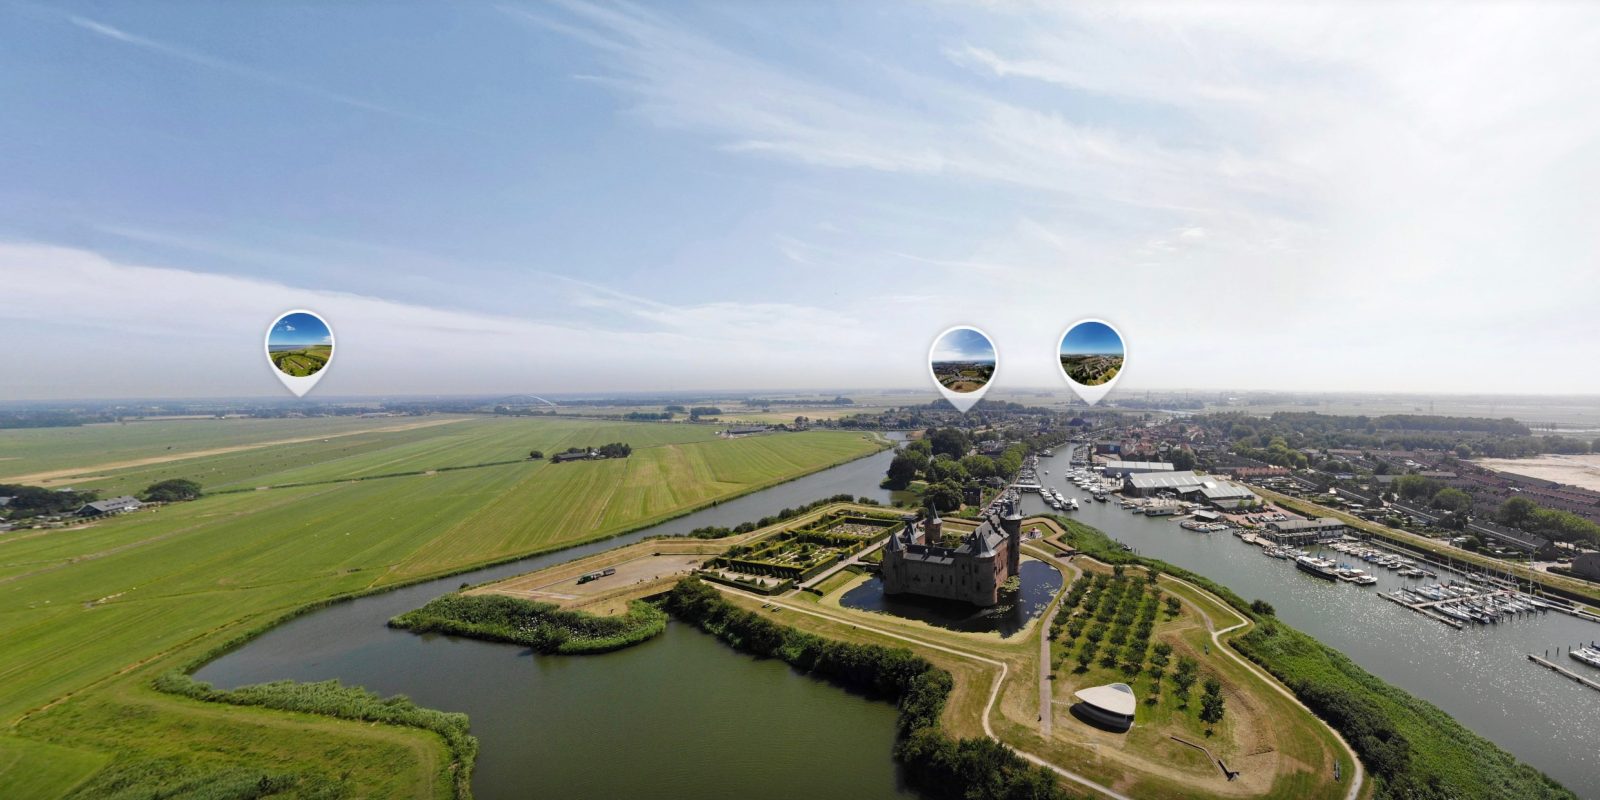 Drone project shows Dutch Water Line in 360-degree aerial photos